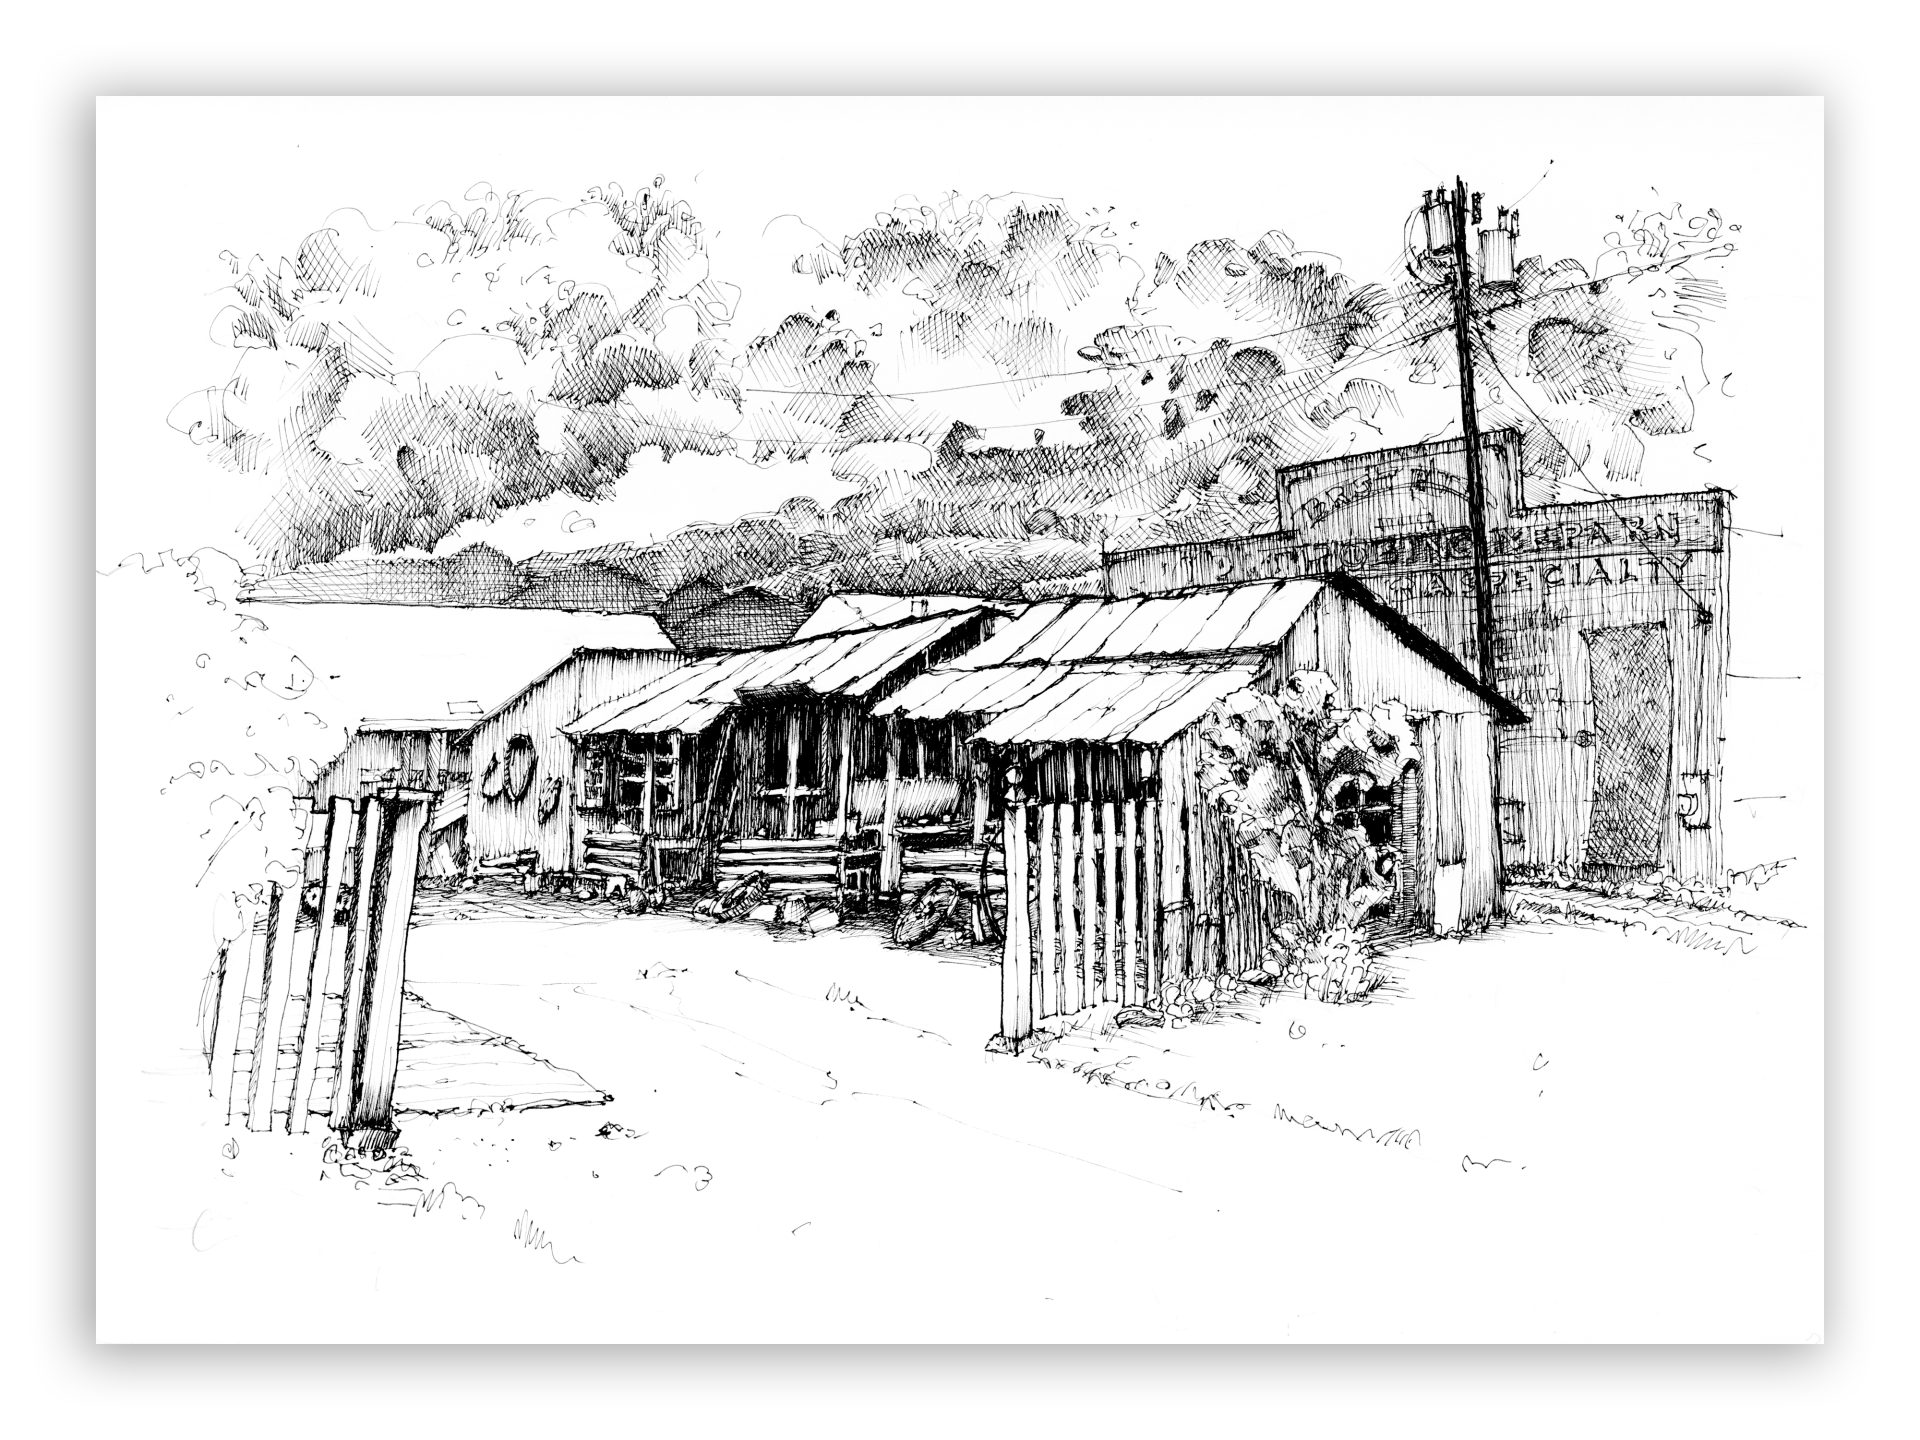 ink drawing of a westcliffe workshed